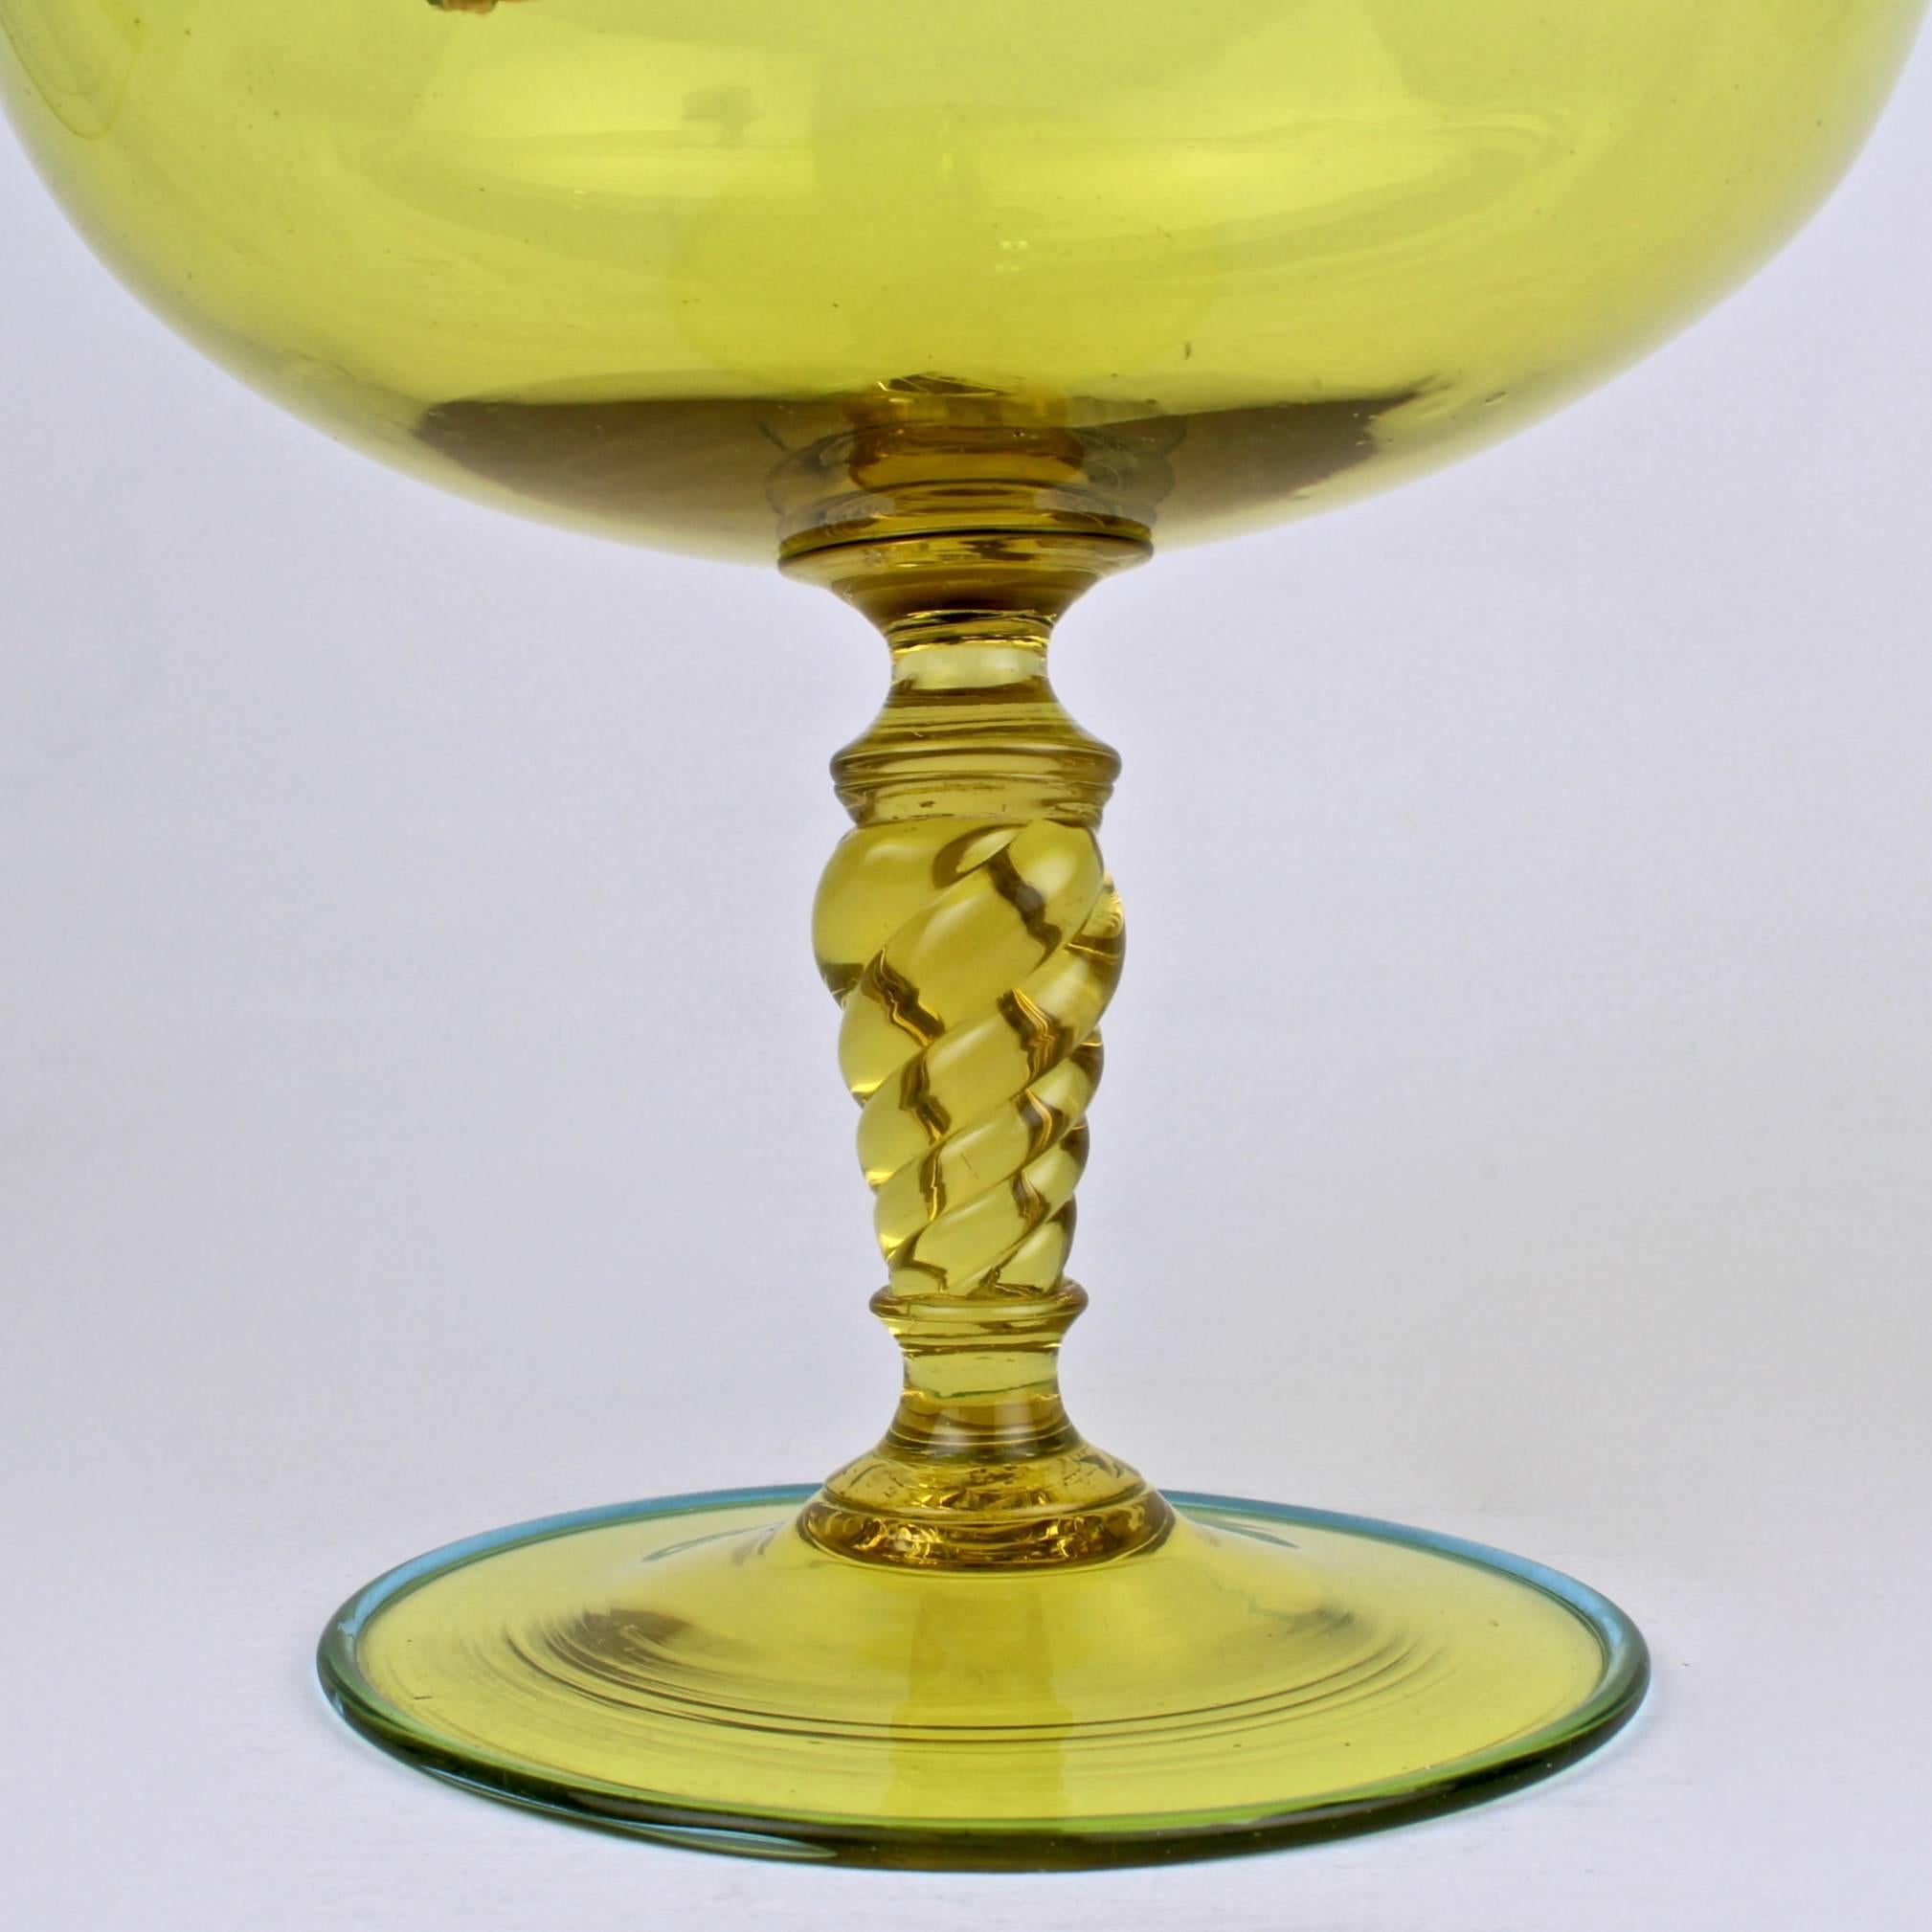 20th Century Large Canary Yellow Venetian/Murano Glass Covered Footed Bowl with Flower Finial